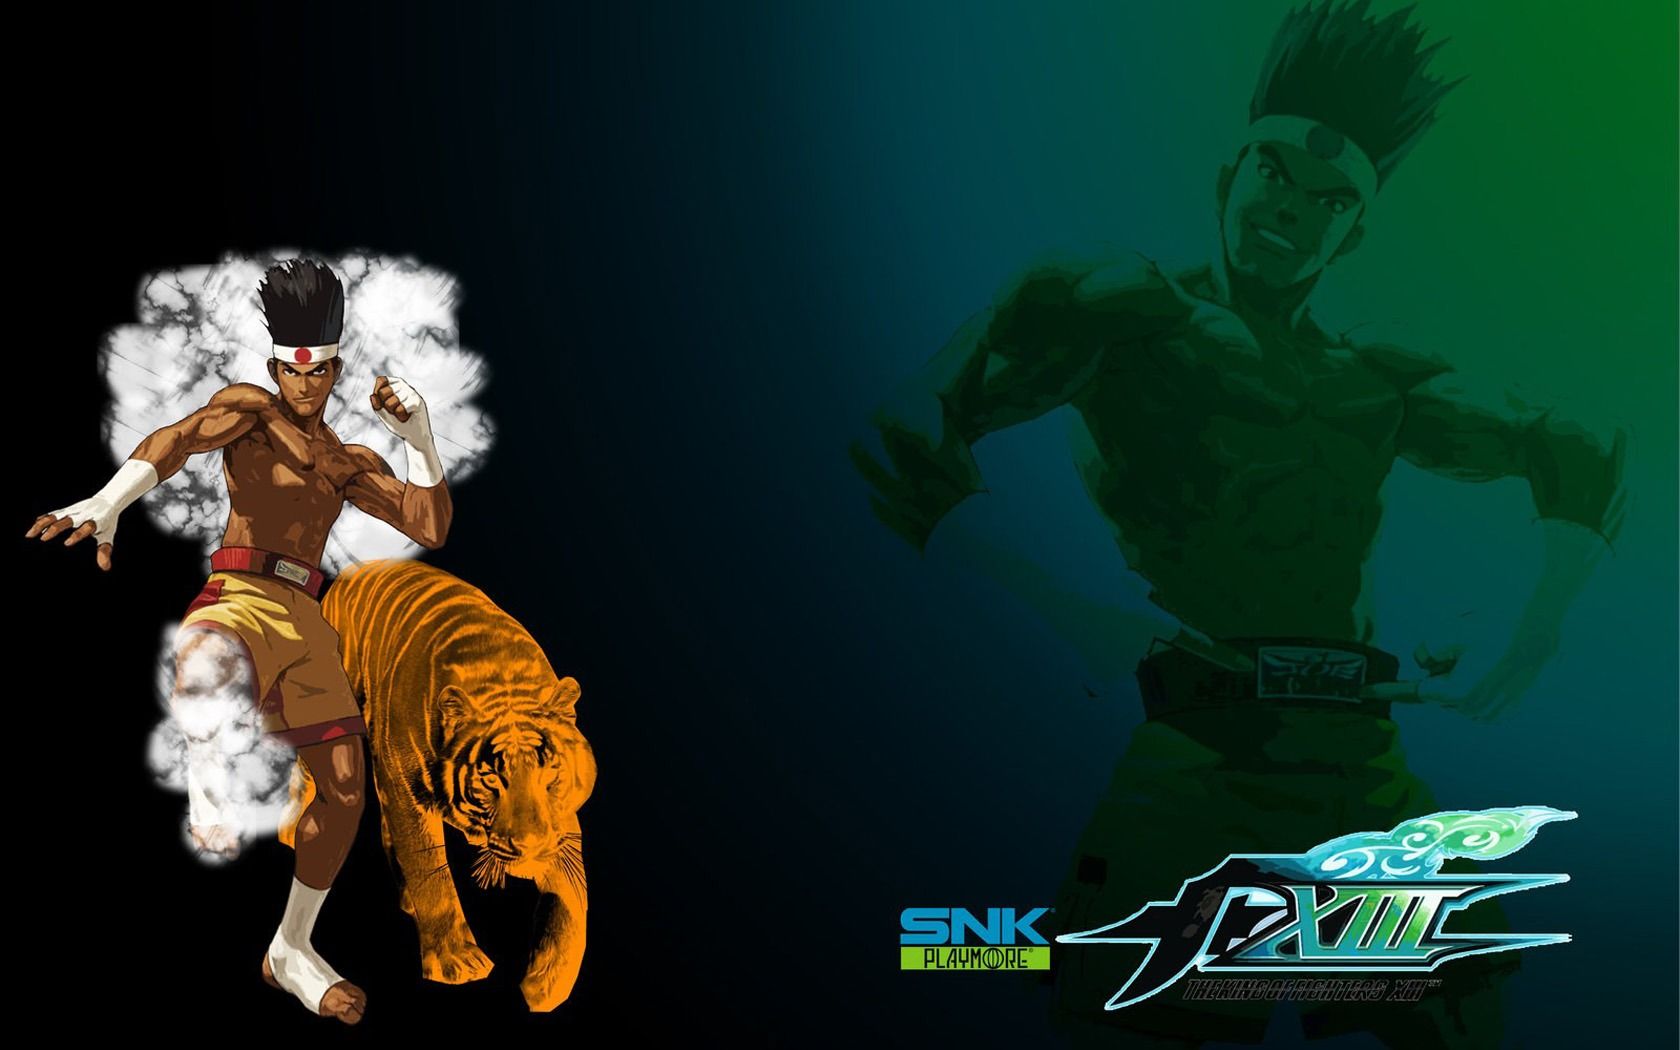 The King of Fighters XIII wallpaper Wallpaper Download King of Fighters XIII wallpaper Wallpaper Wallpaper Site